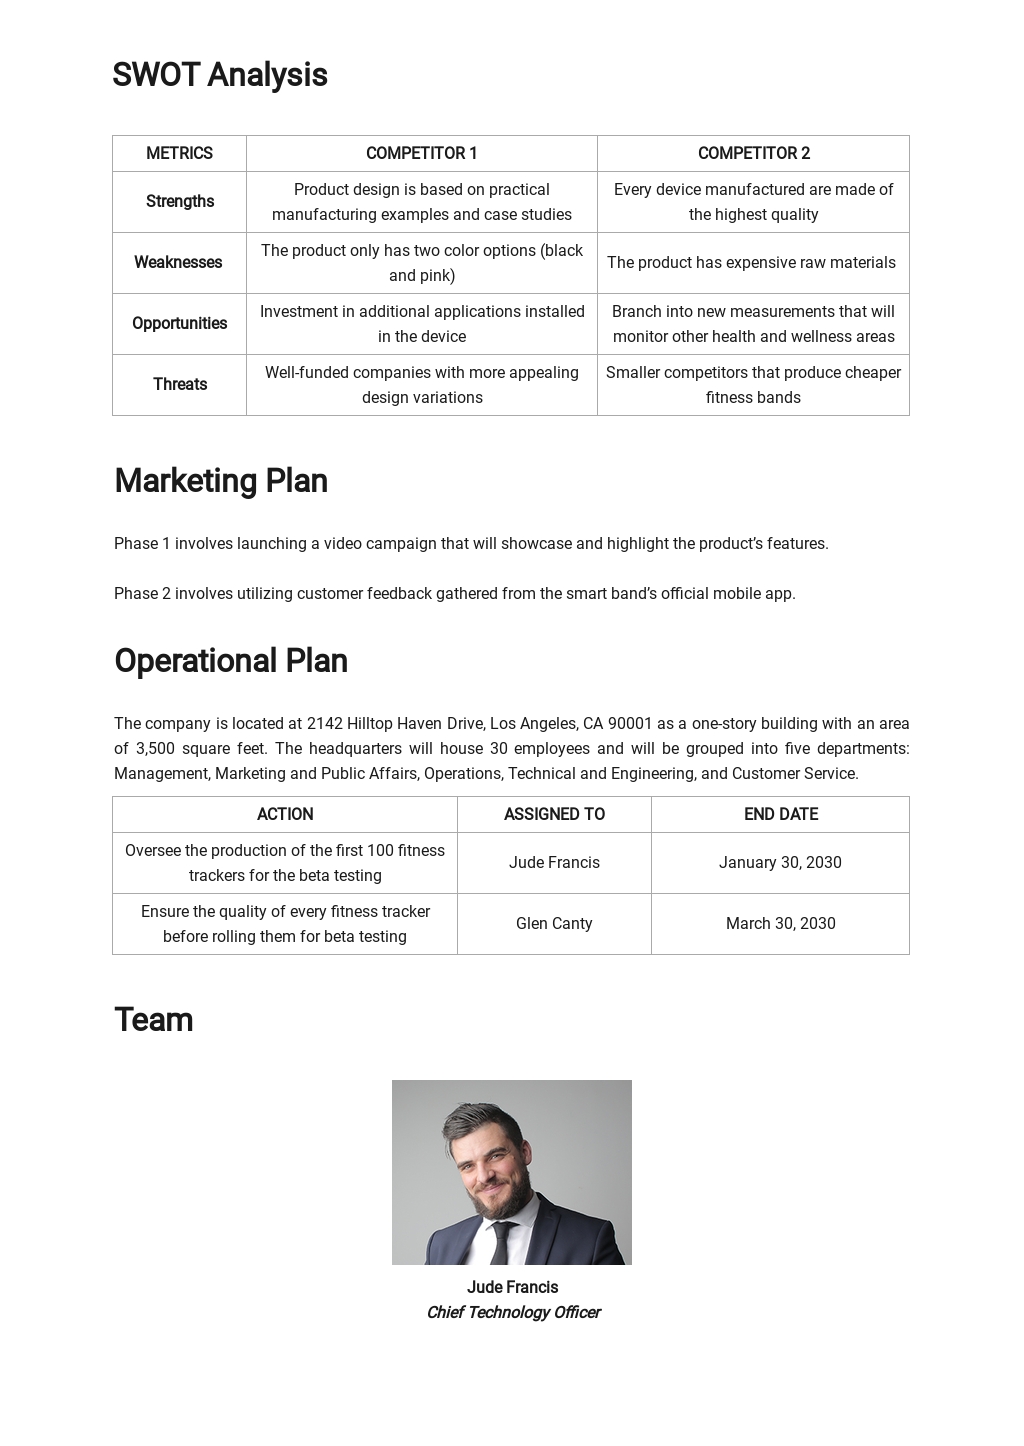 FREE Lean Six Sigma Business Plan Template in Google Docs, Word, Apple